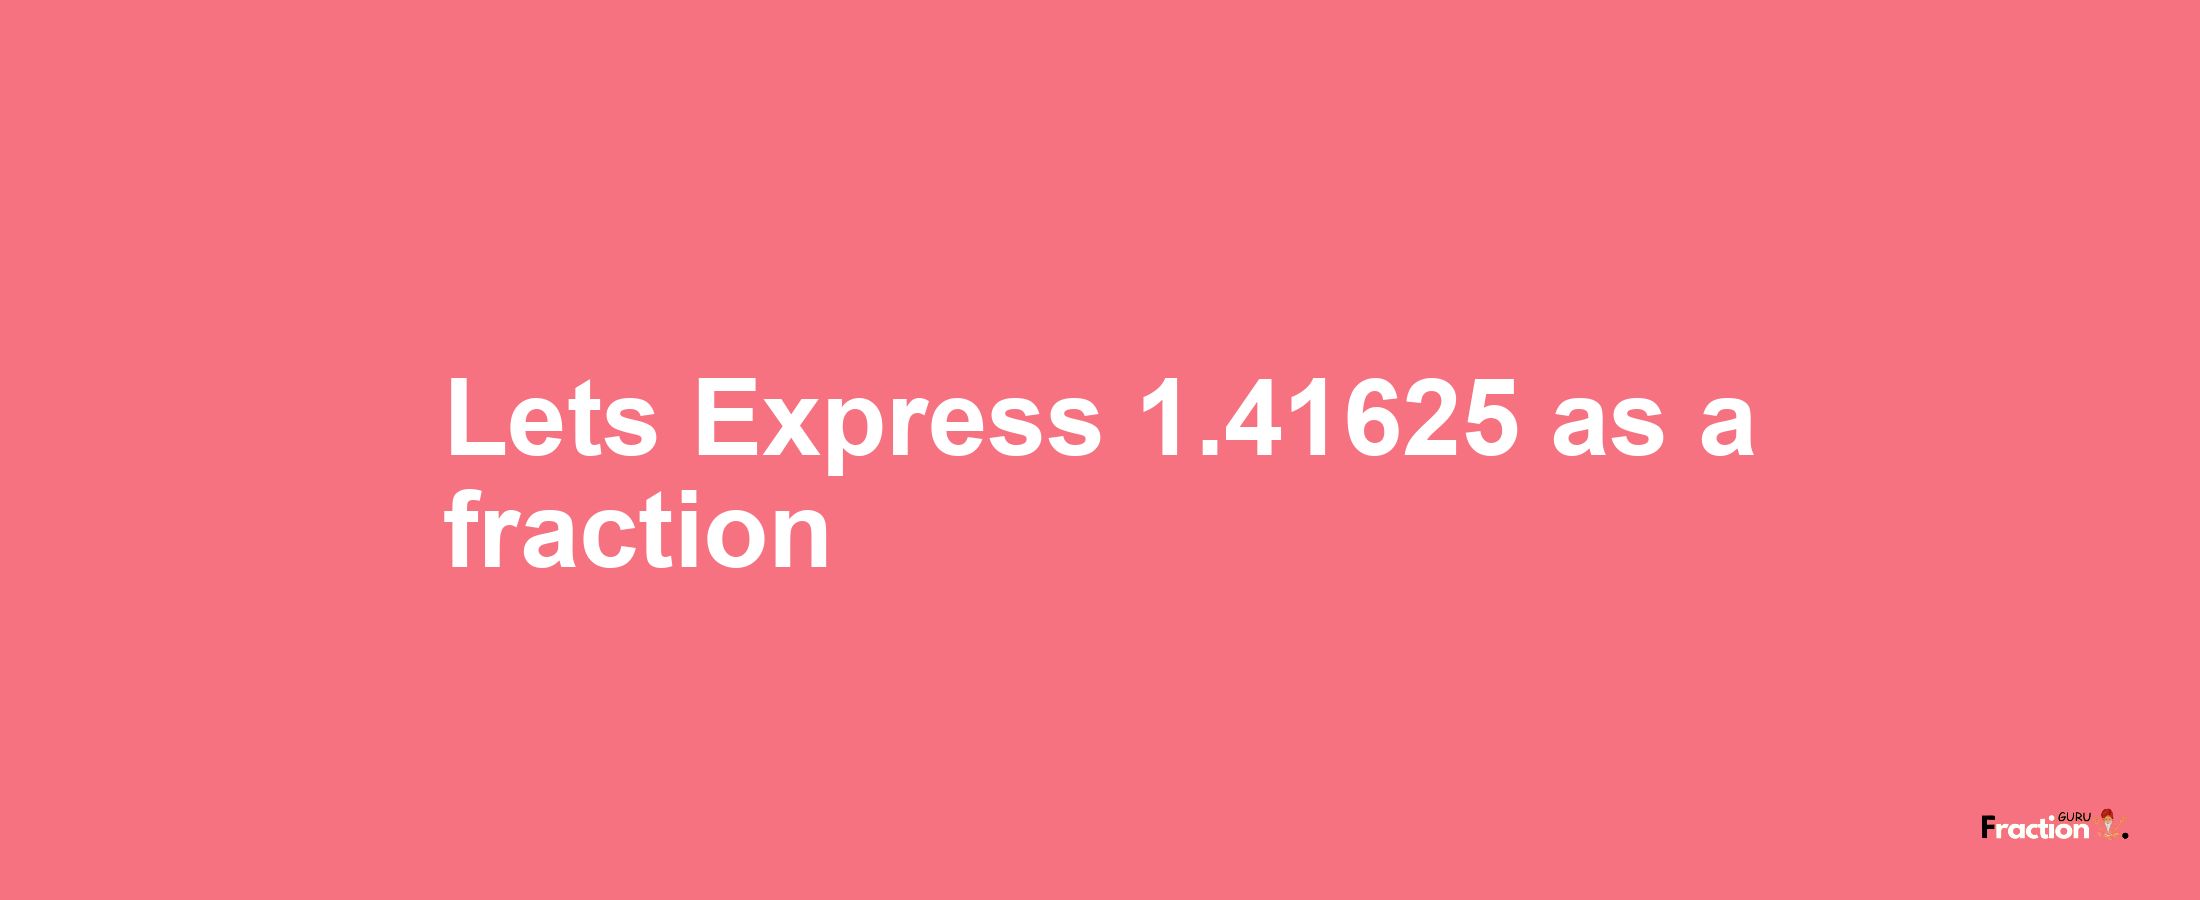 Lets Express 1.41625 as afraction